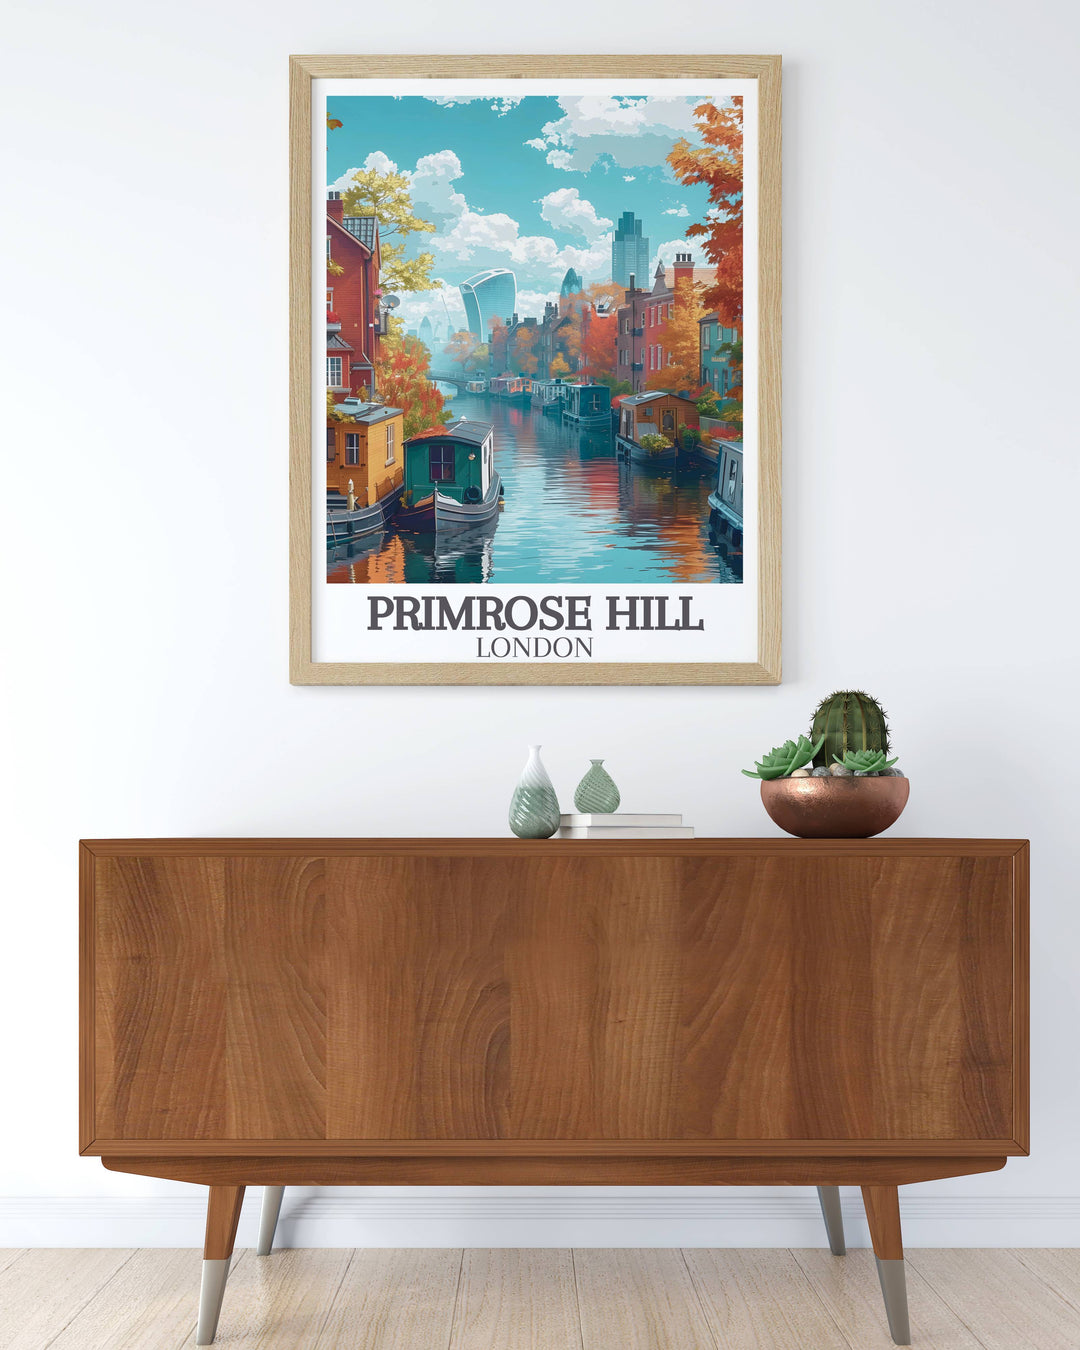 Regents Canal Prints bringing the lush greenery and picturesque views of this beloved London waterway into your home.